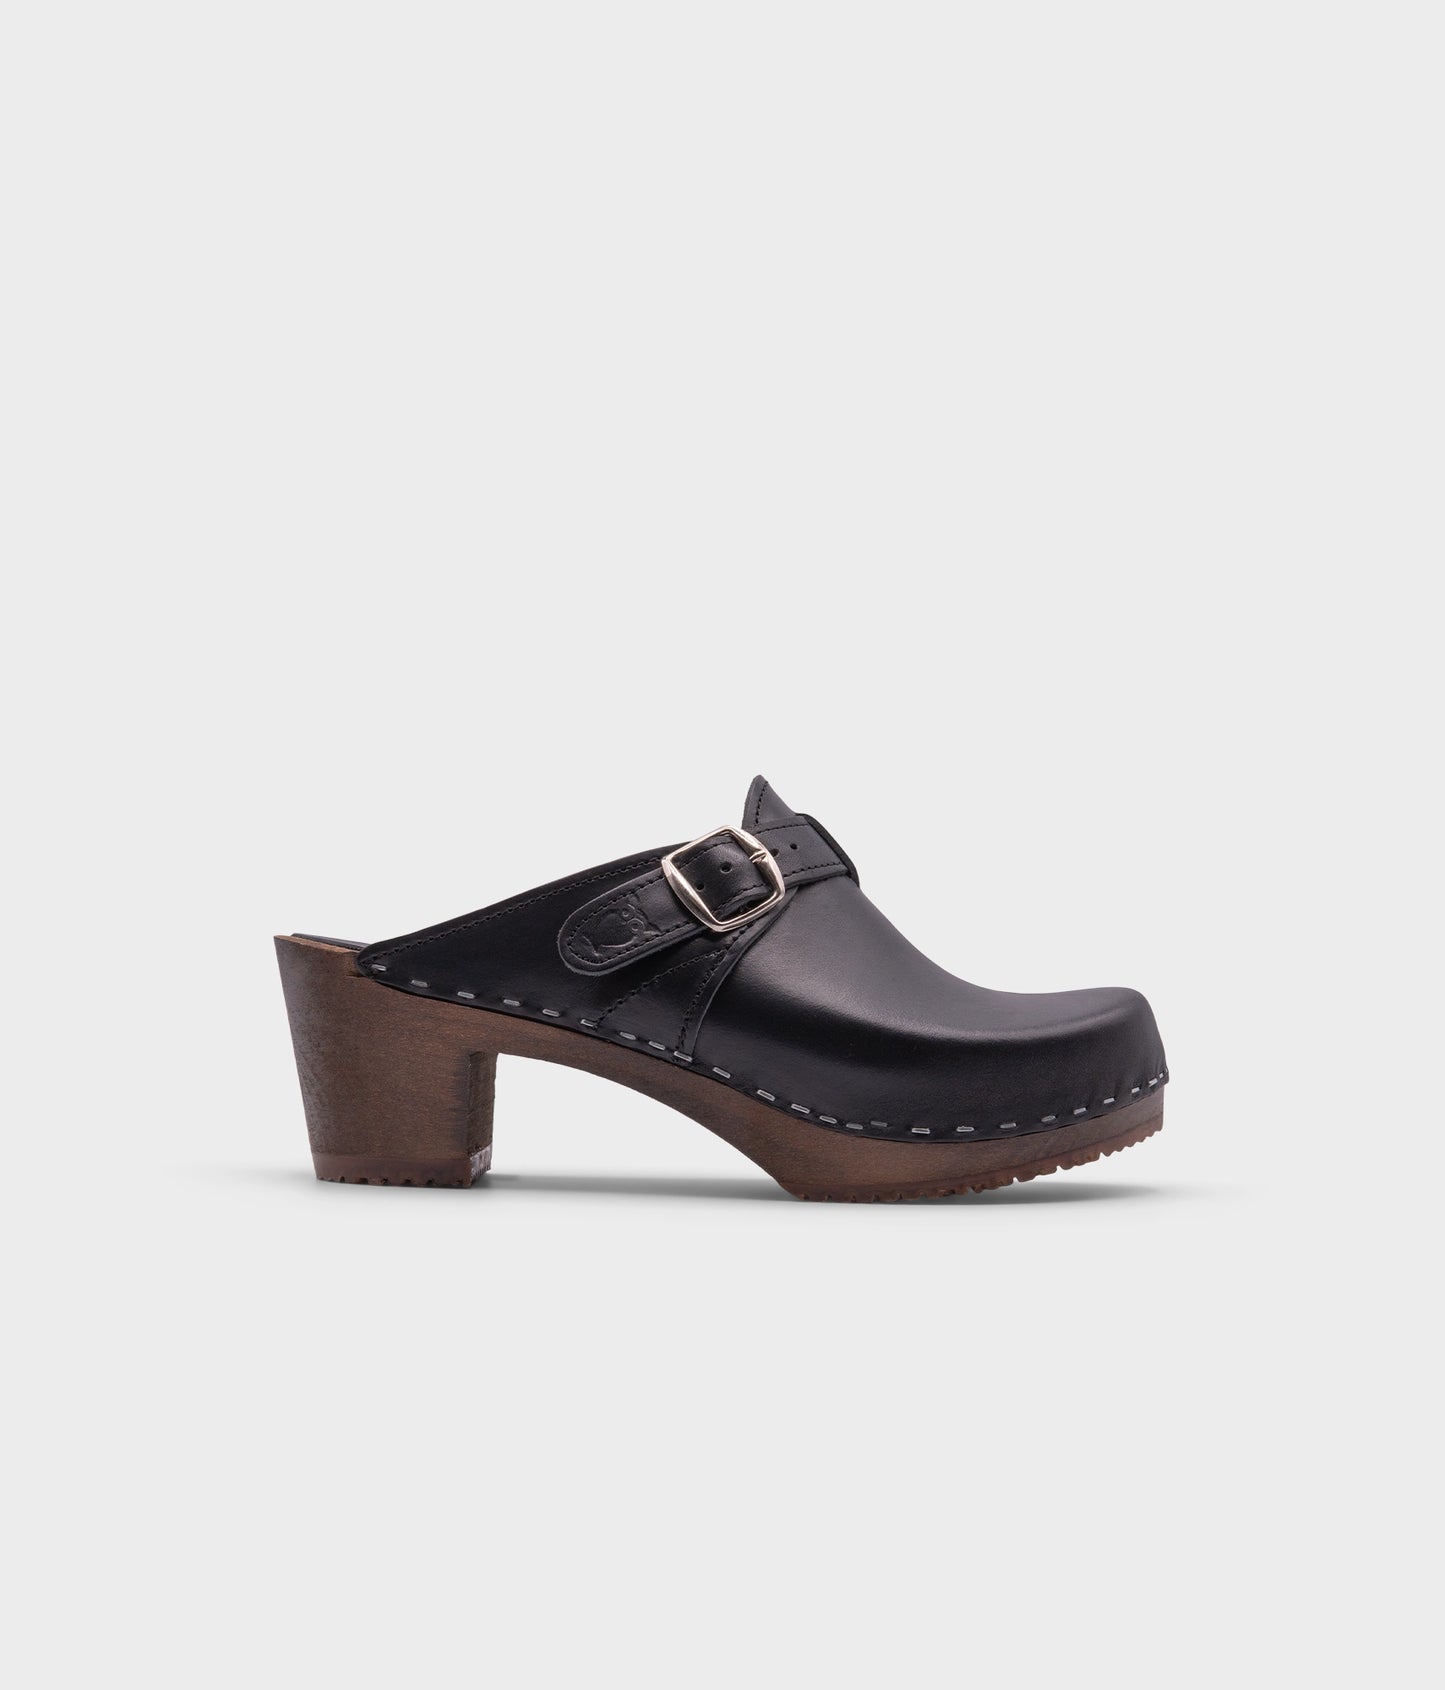 high heeled clog mules in black vegetable tanned leather with a silver buckle stapled on a dark wooden base